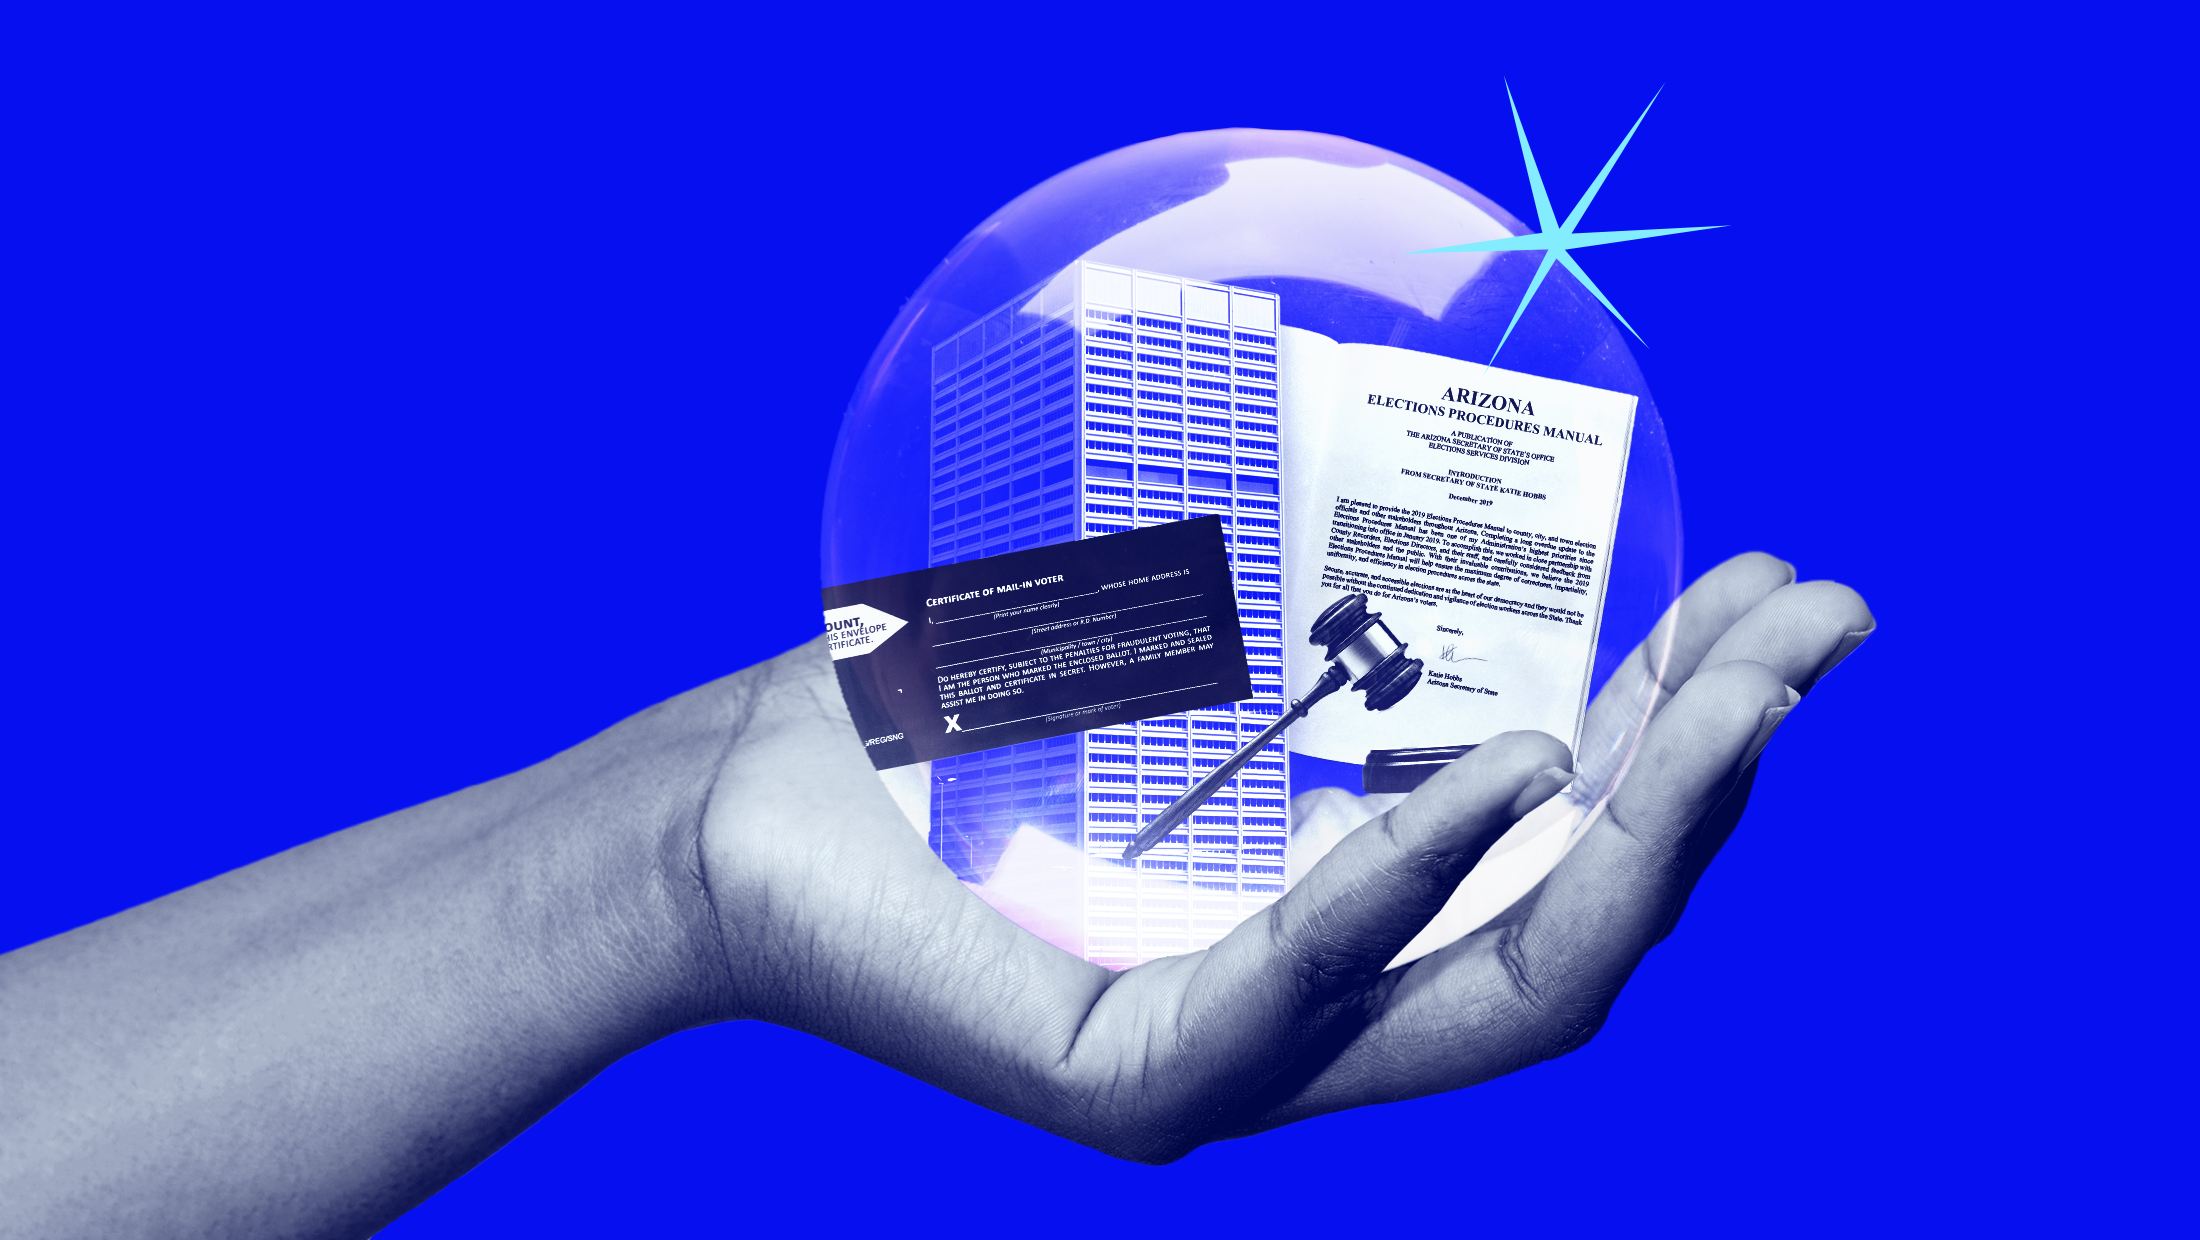 A bright blue background with a hand holding a crystal ball revealing a federal courthouse in Georgia, gavel, Arizona's election manual and a certificate for a mail-in ballot